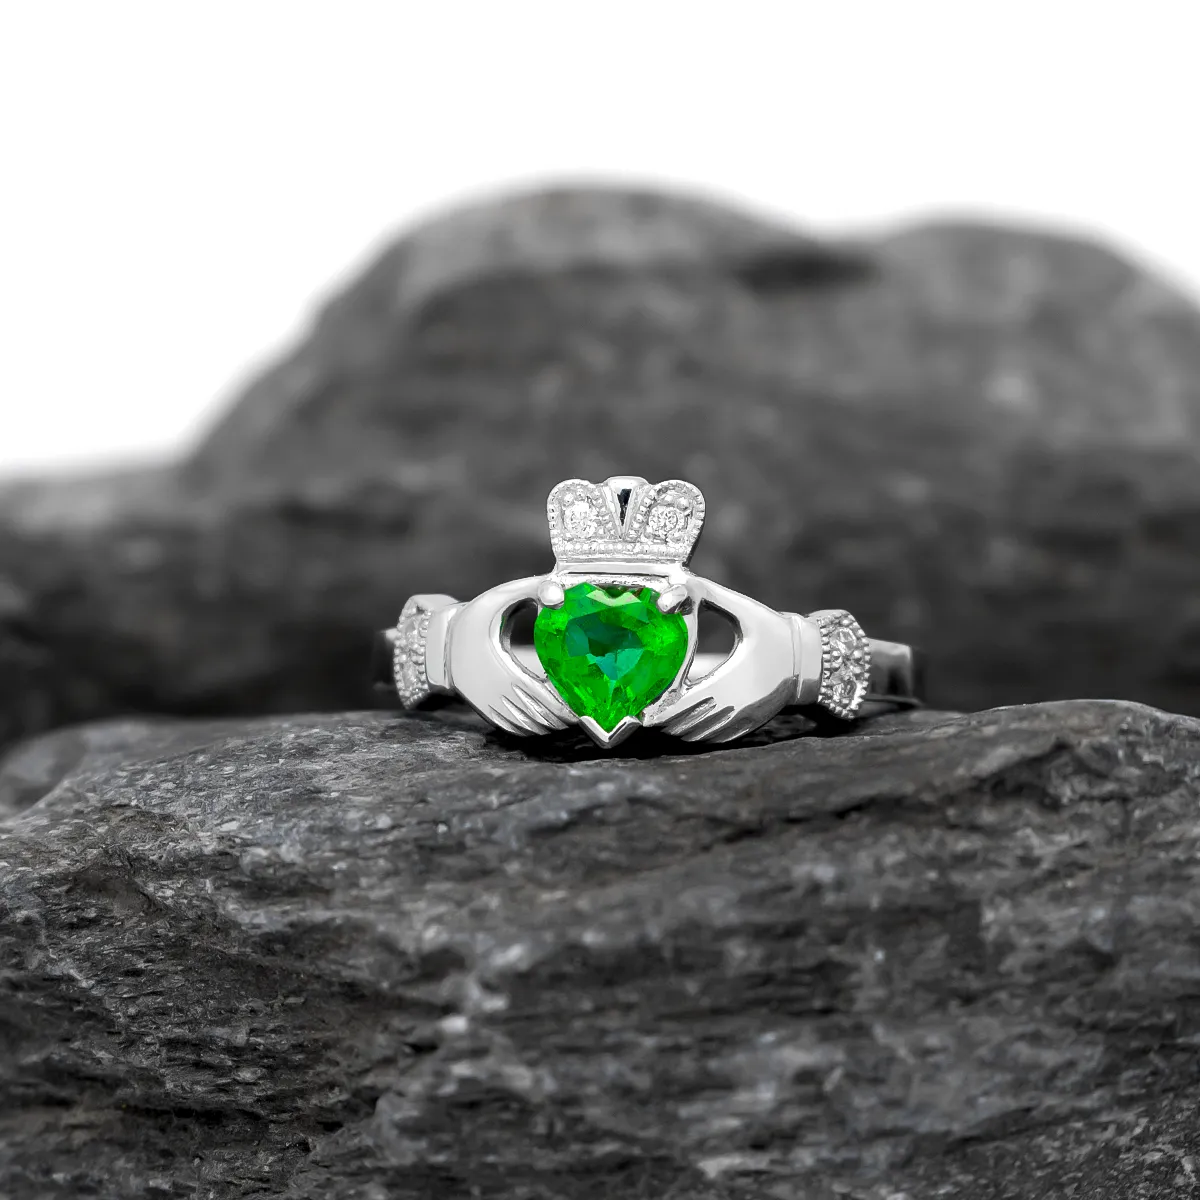 Luxurious Claddagh Ring Set, Crafted In White Gold And Set With A Heart-shaped Emerald And Side Diamonds